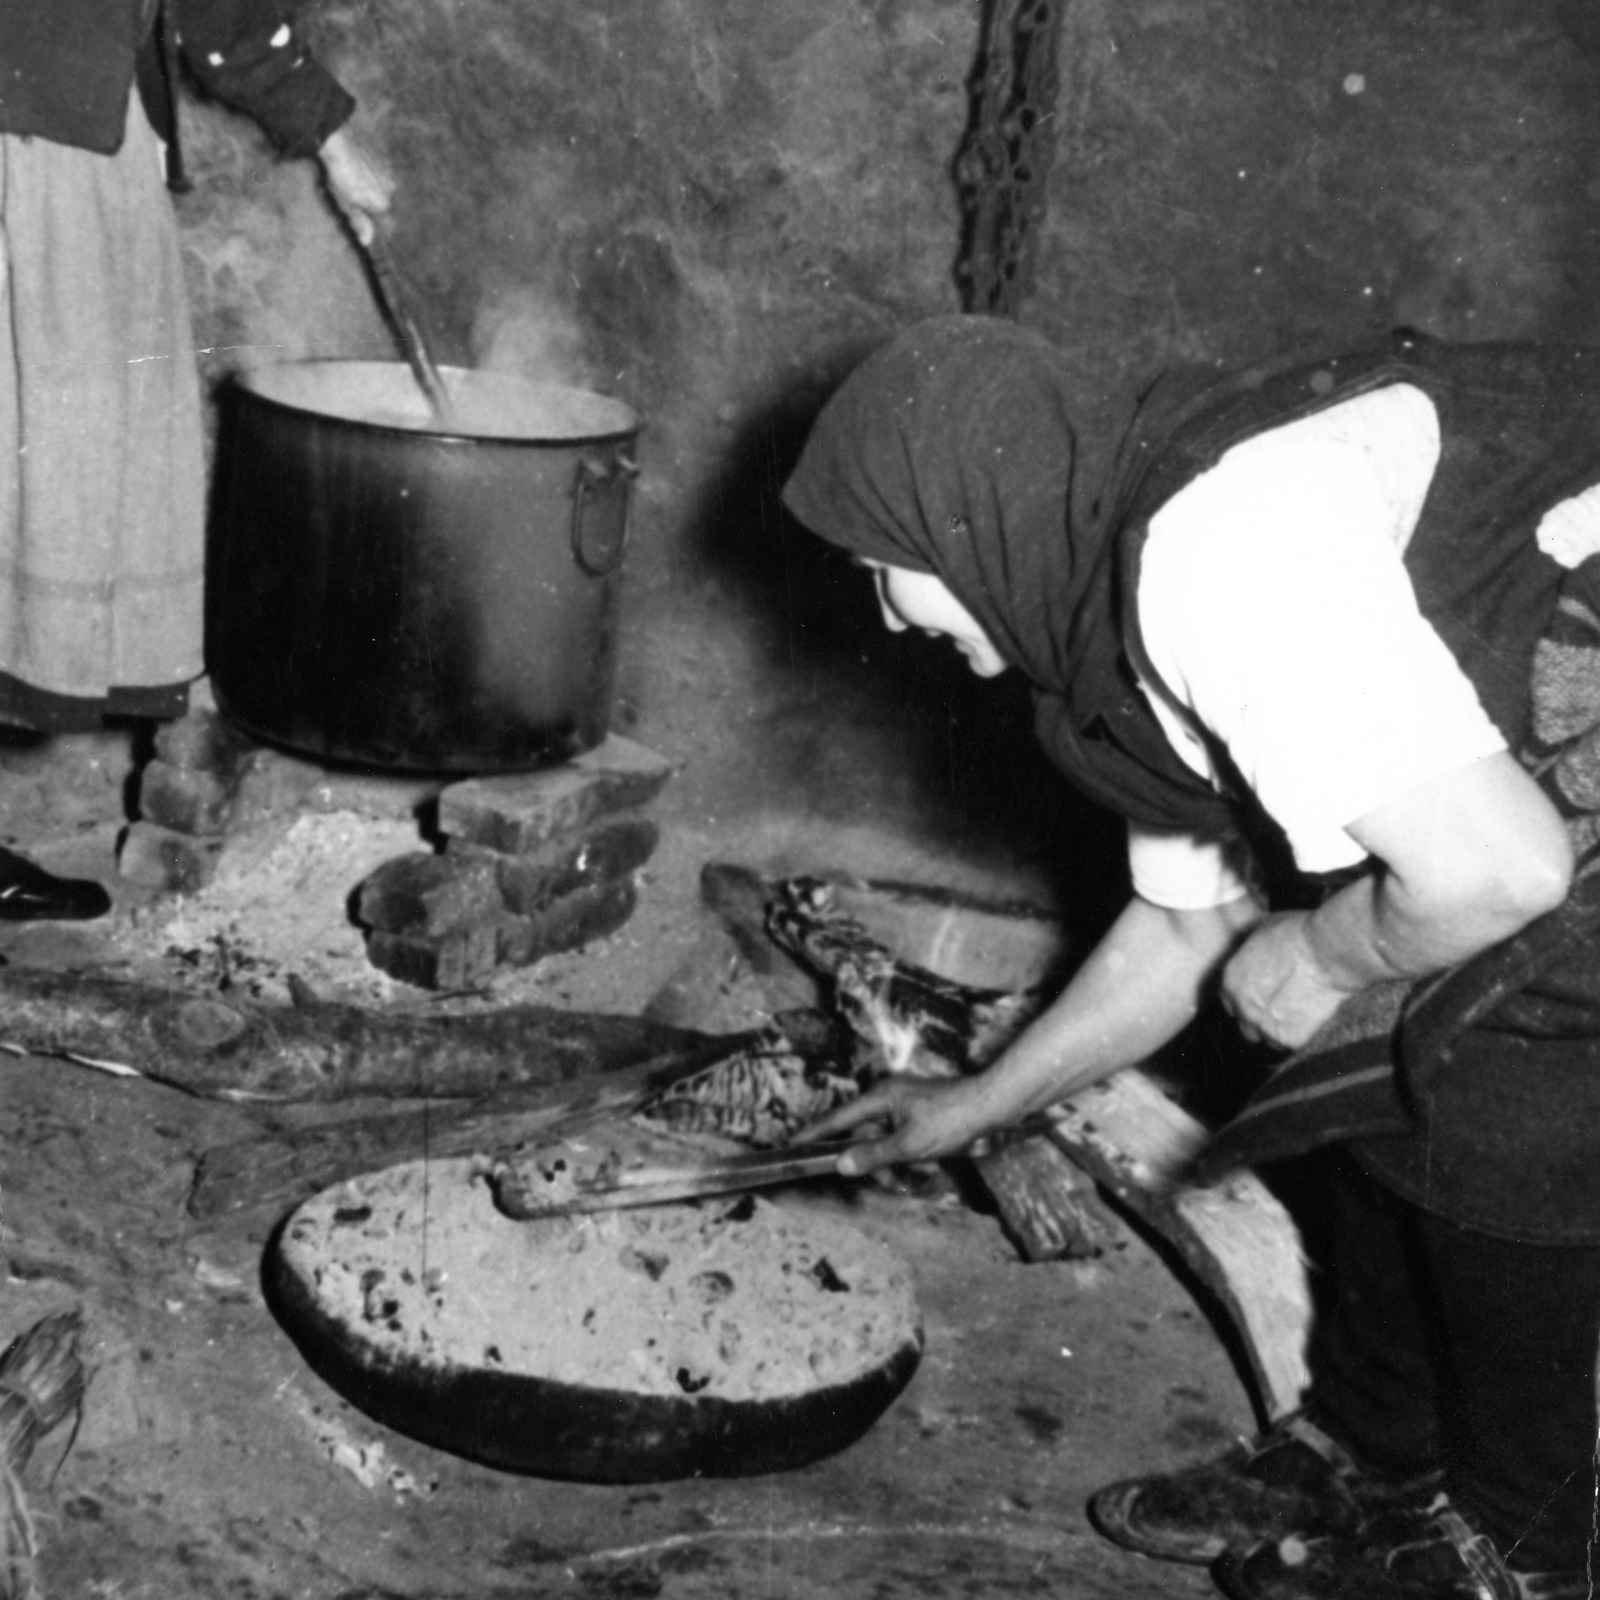 A woman sets fire to a hearth - black and white photo.